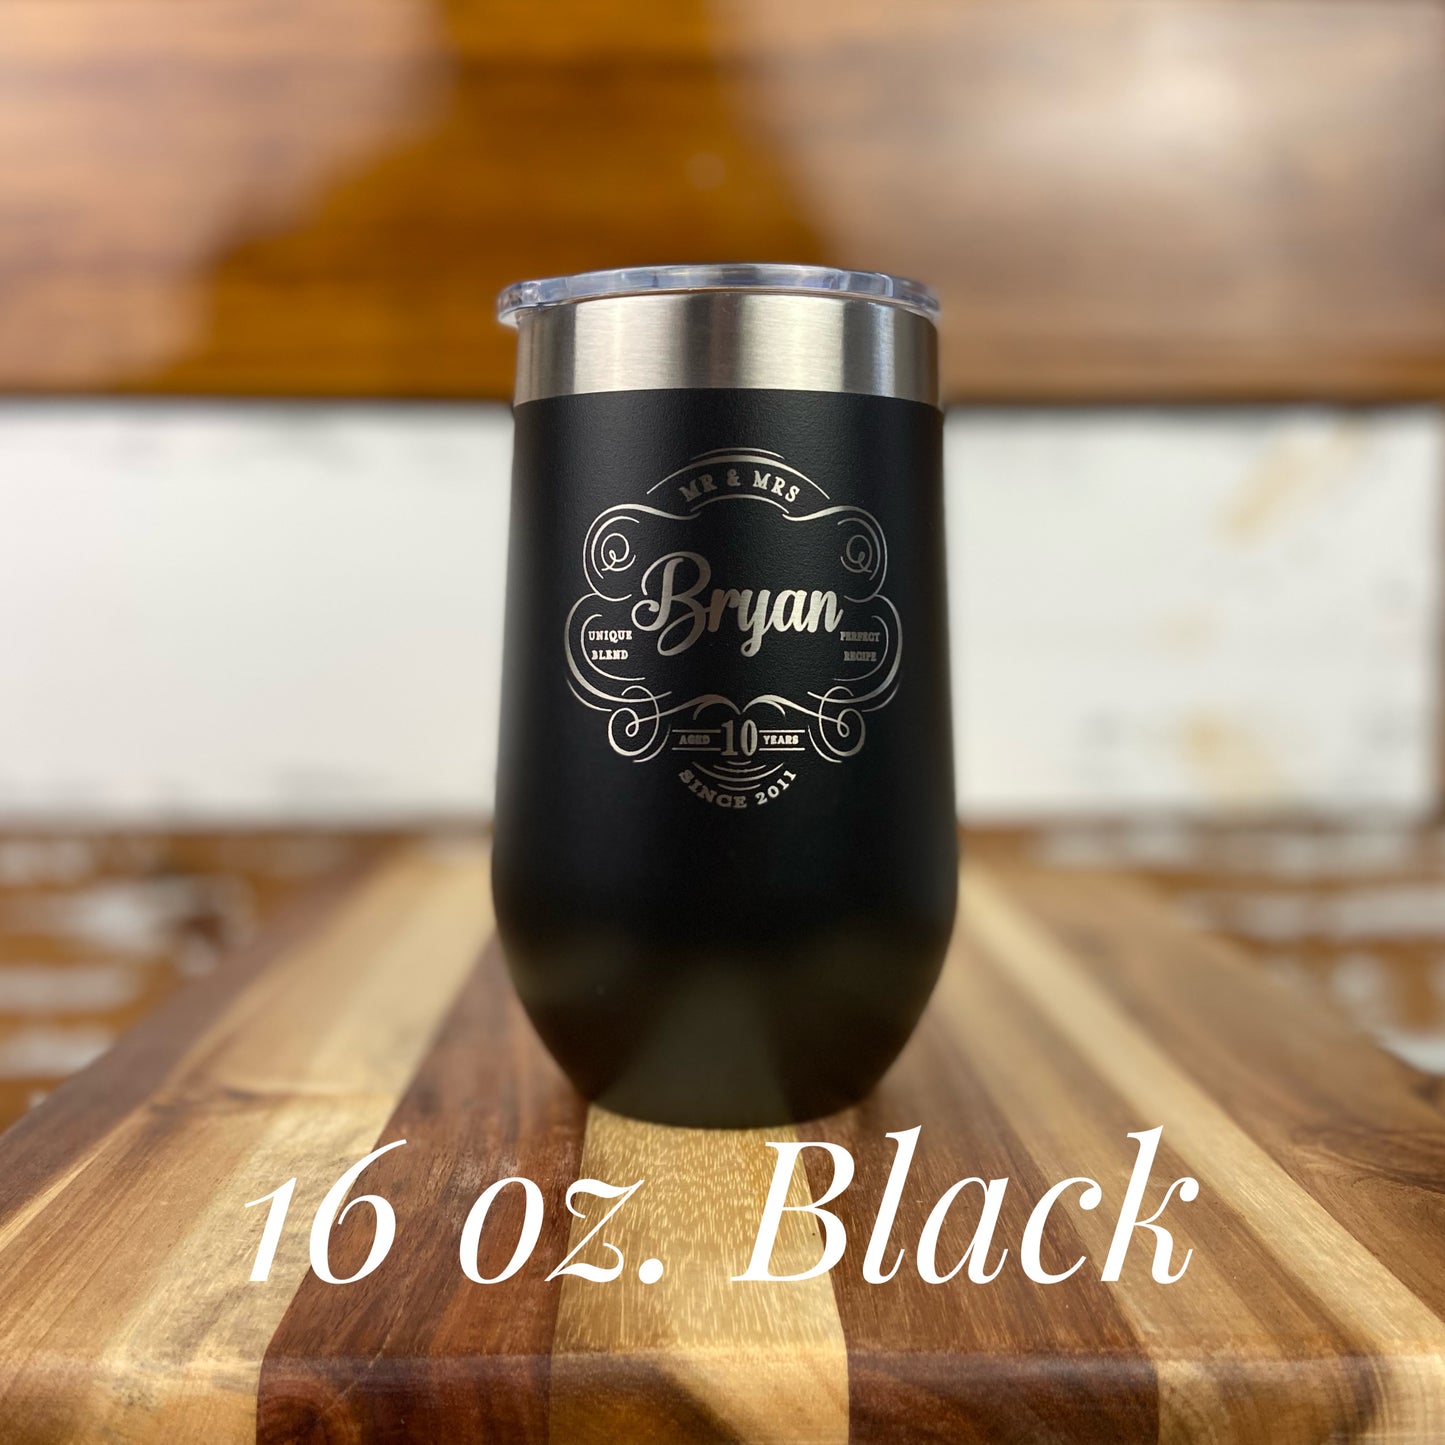 Perfect 10th Anniversary Gift! Personalized Anniversary Wine Tumblers in Stainless Steel